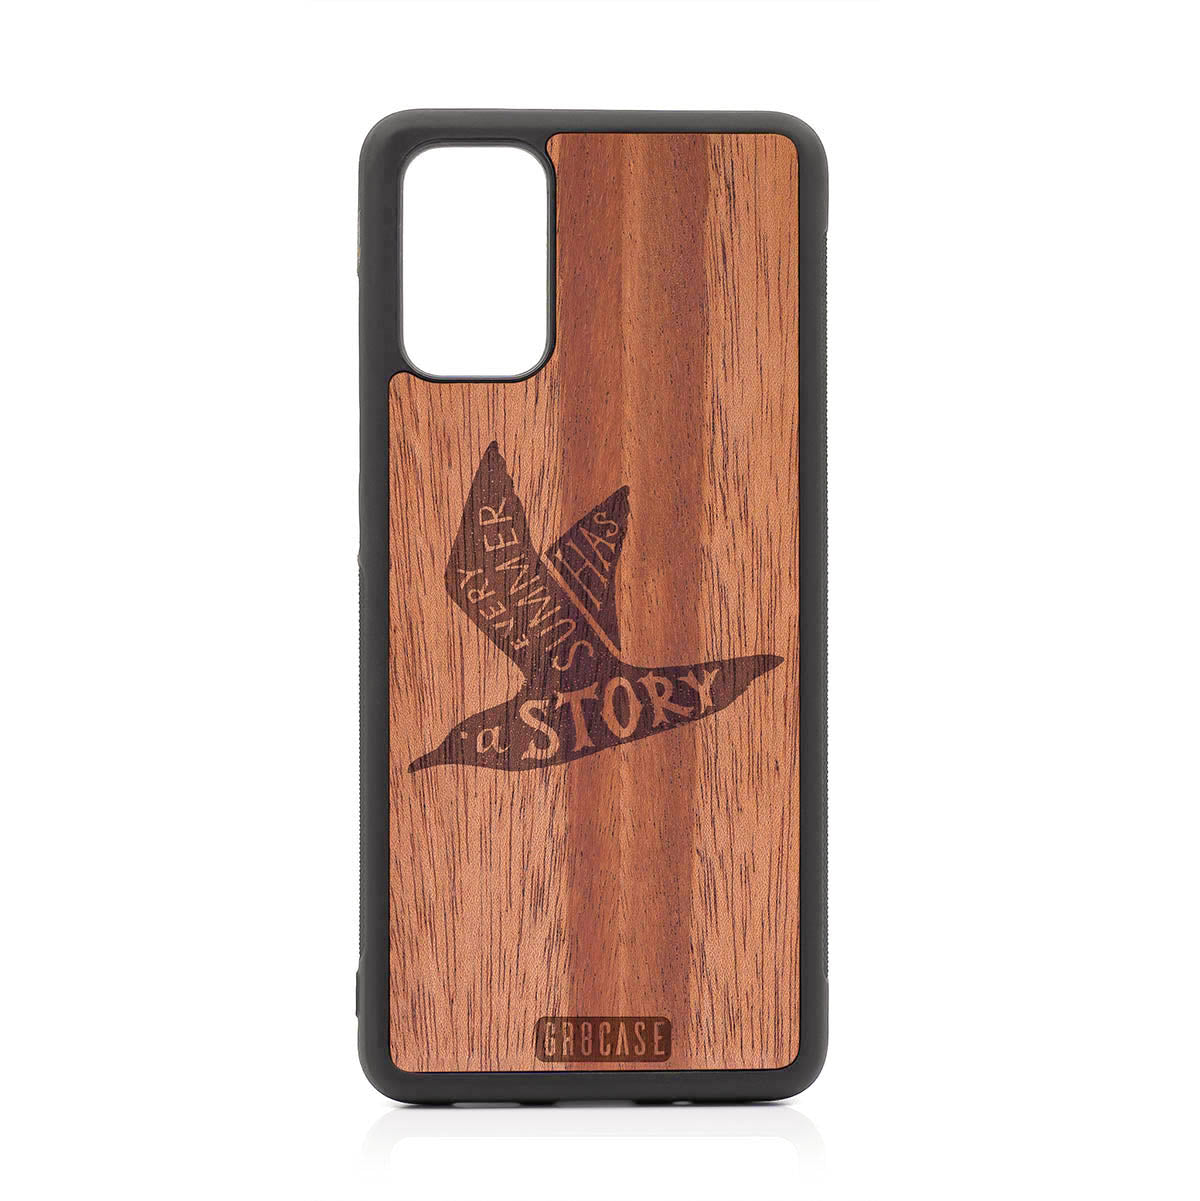 Every Summer Has A Story (Seagull) Design Wood Case For Samsung Galaxy S20 Plus